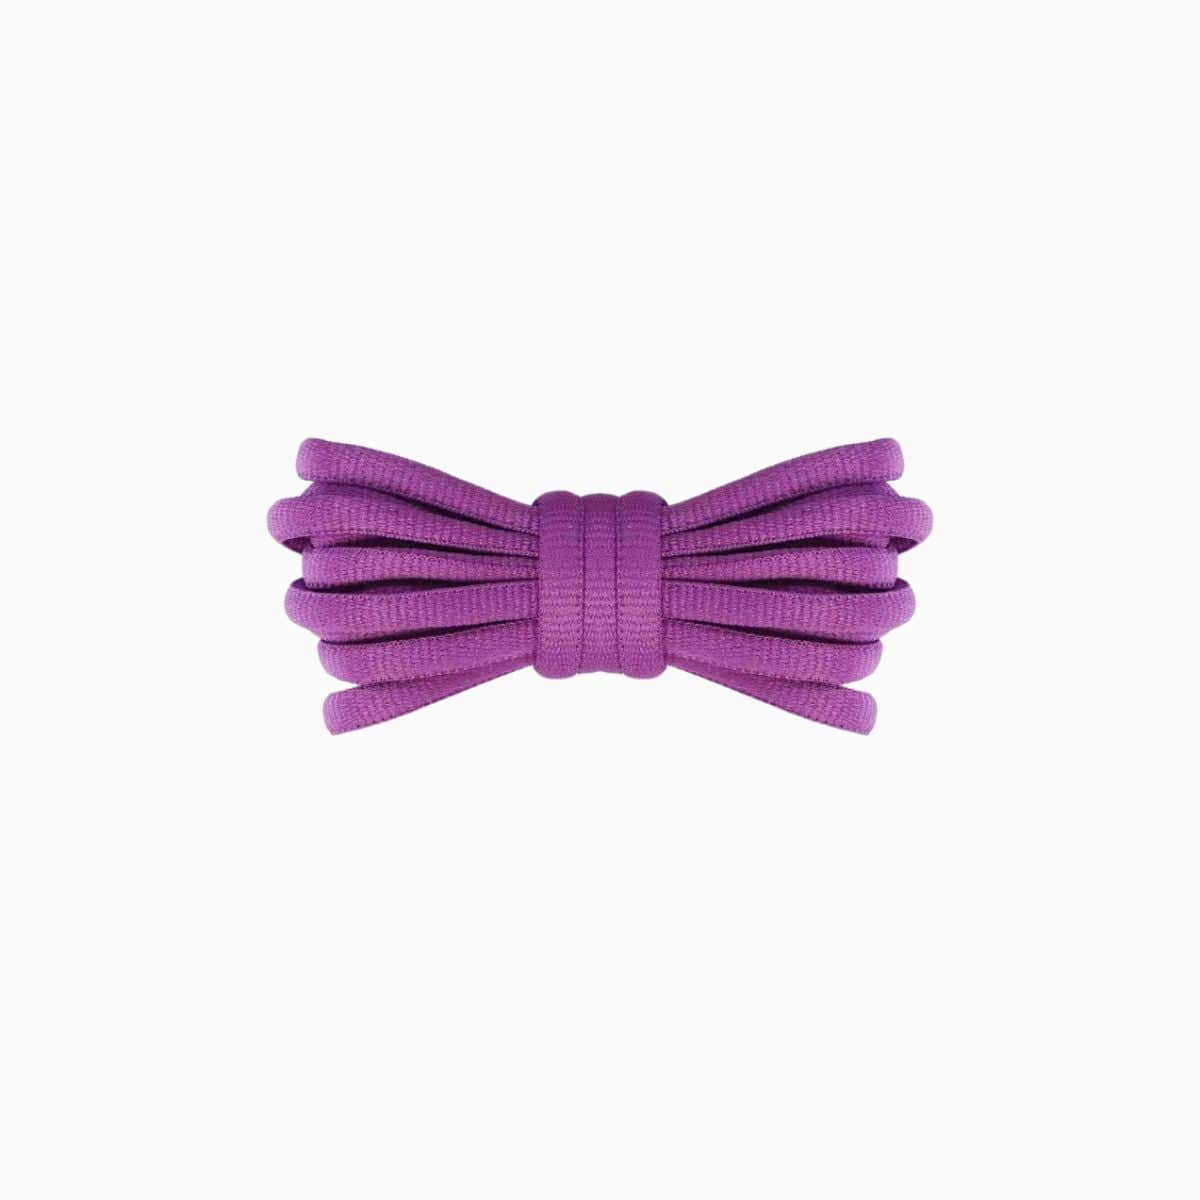 Nike_TN_Replacement_Shoelaces_Sunset_Purple